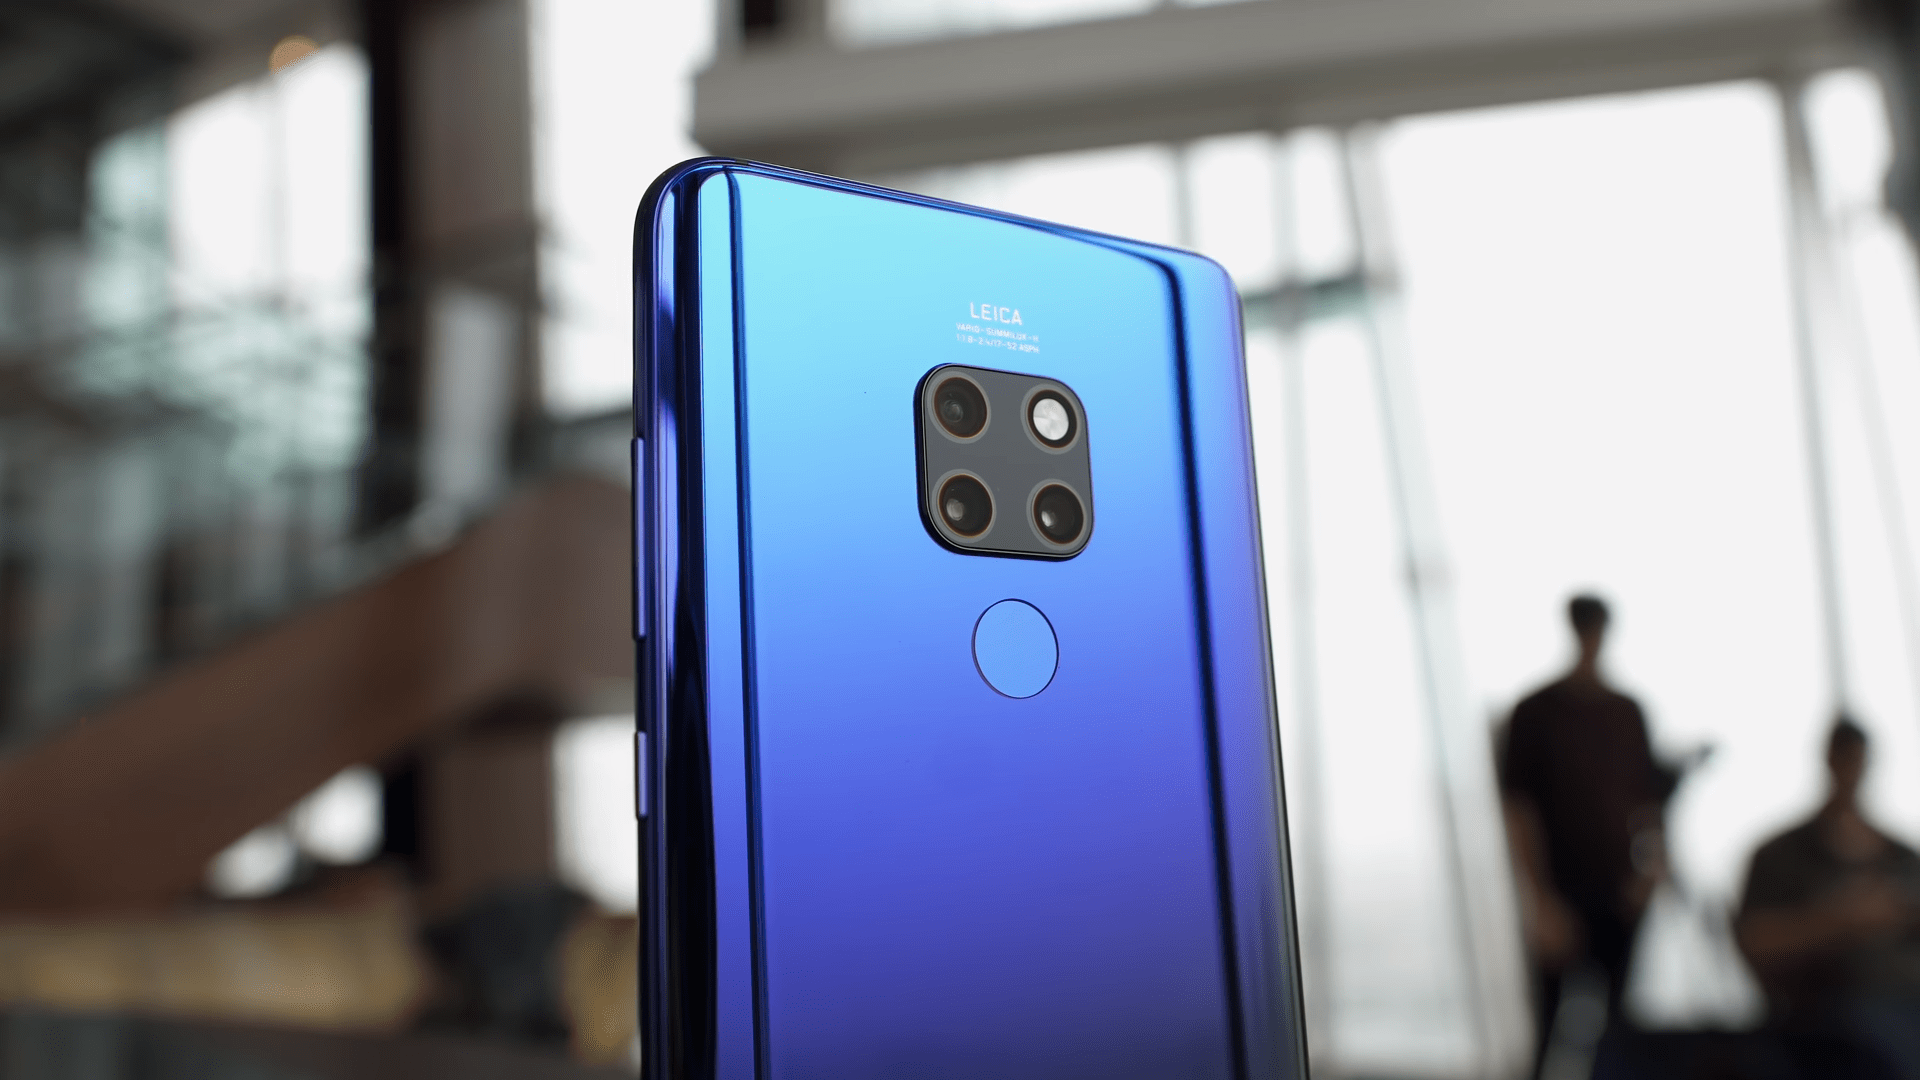 Disable Safe Mode on Huawei Mate 20Disable Safe Mode on Huawei Mate 20